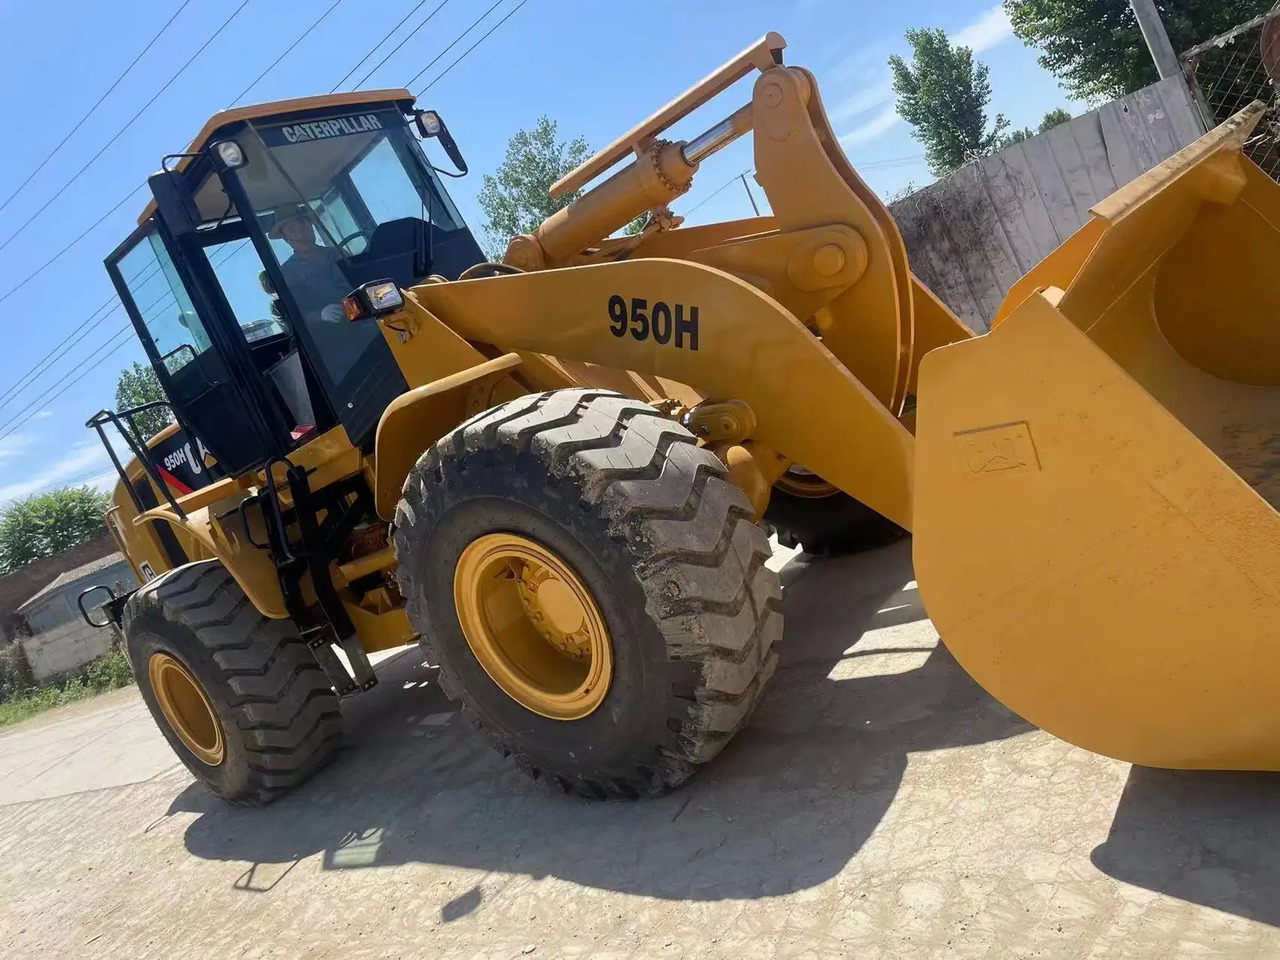 Used Caterpillar 950h Front Wheel Loader in Good Condition Secondhand Caterpillar Loader - Wheel loader: picture 5